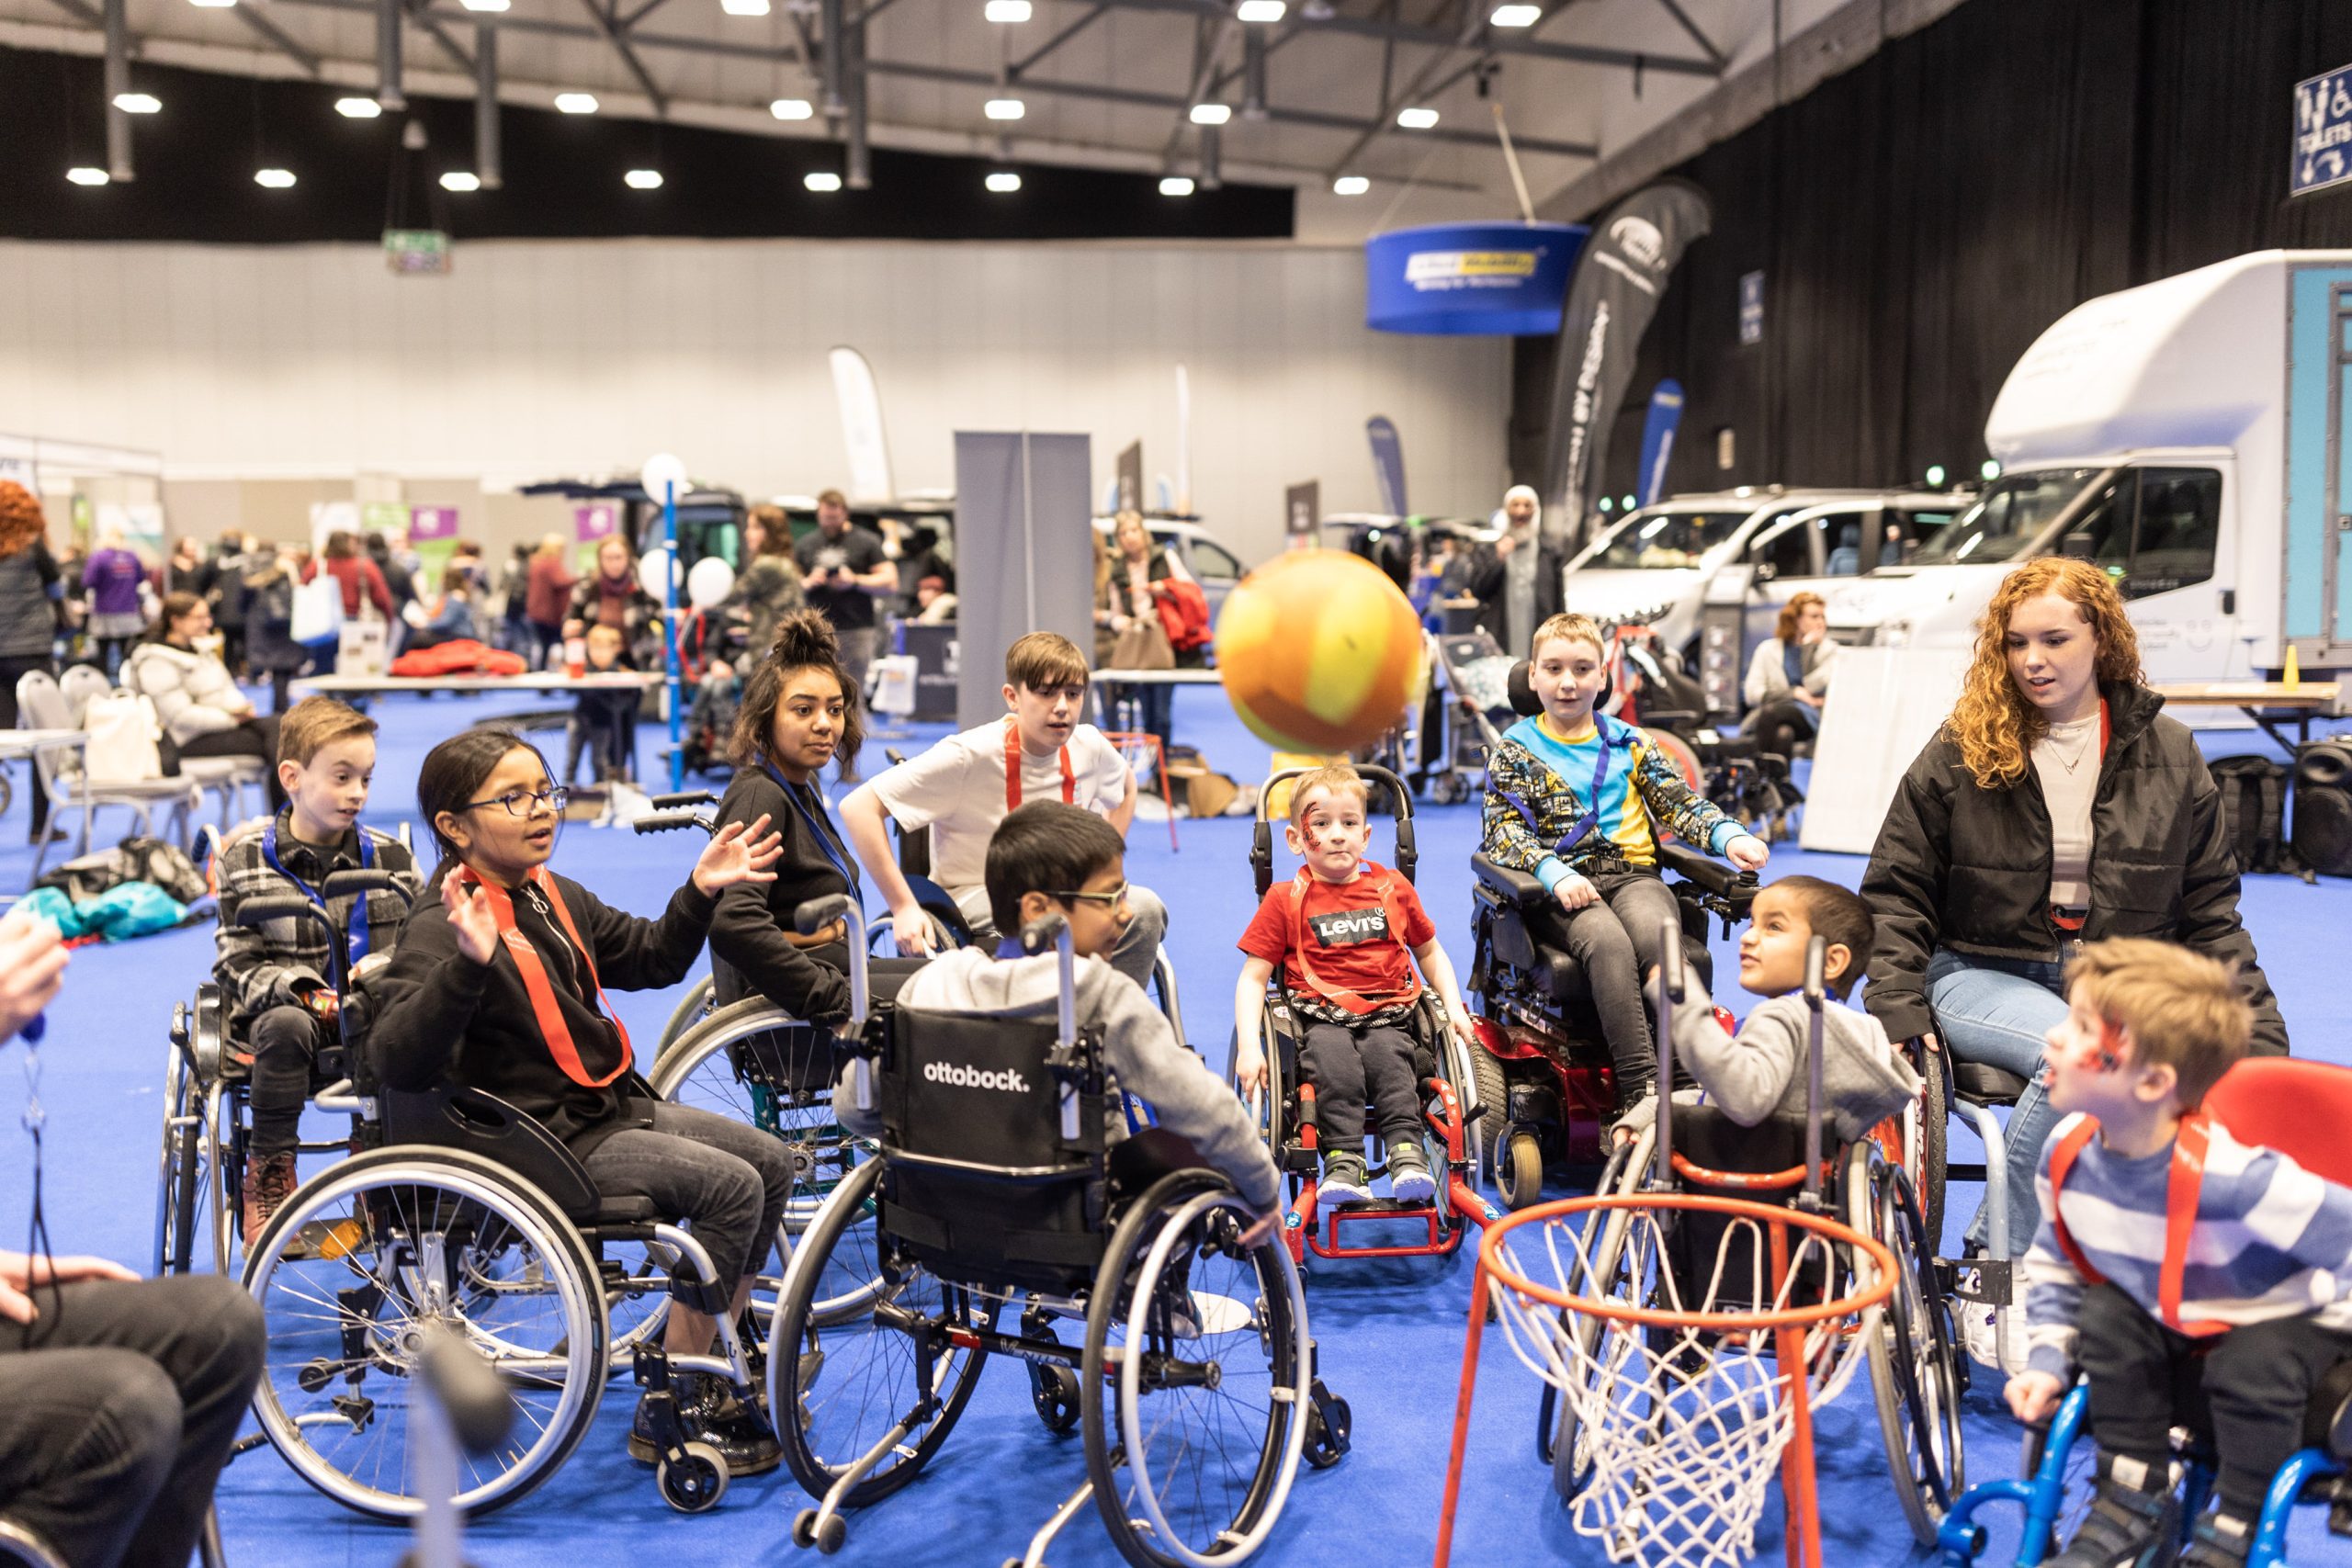 Girls and boys playing basket ball in wheel chairs